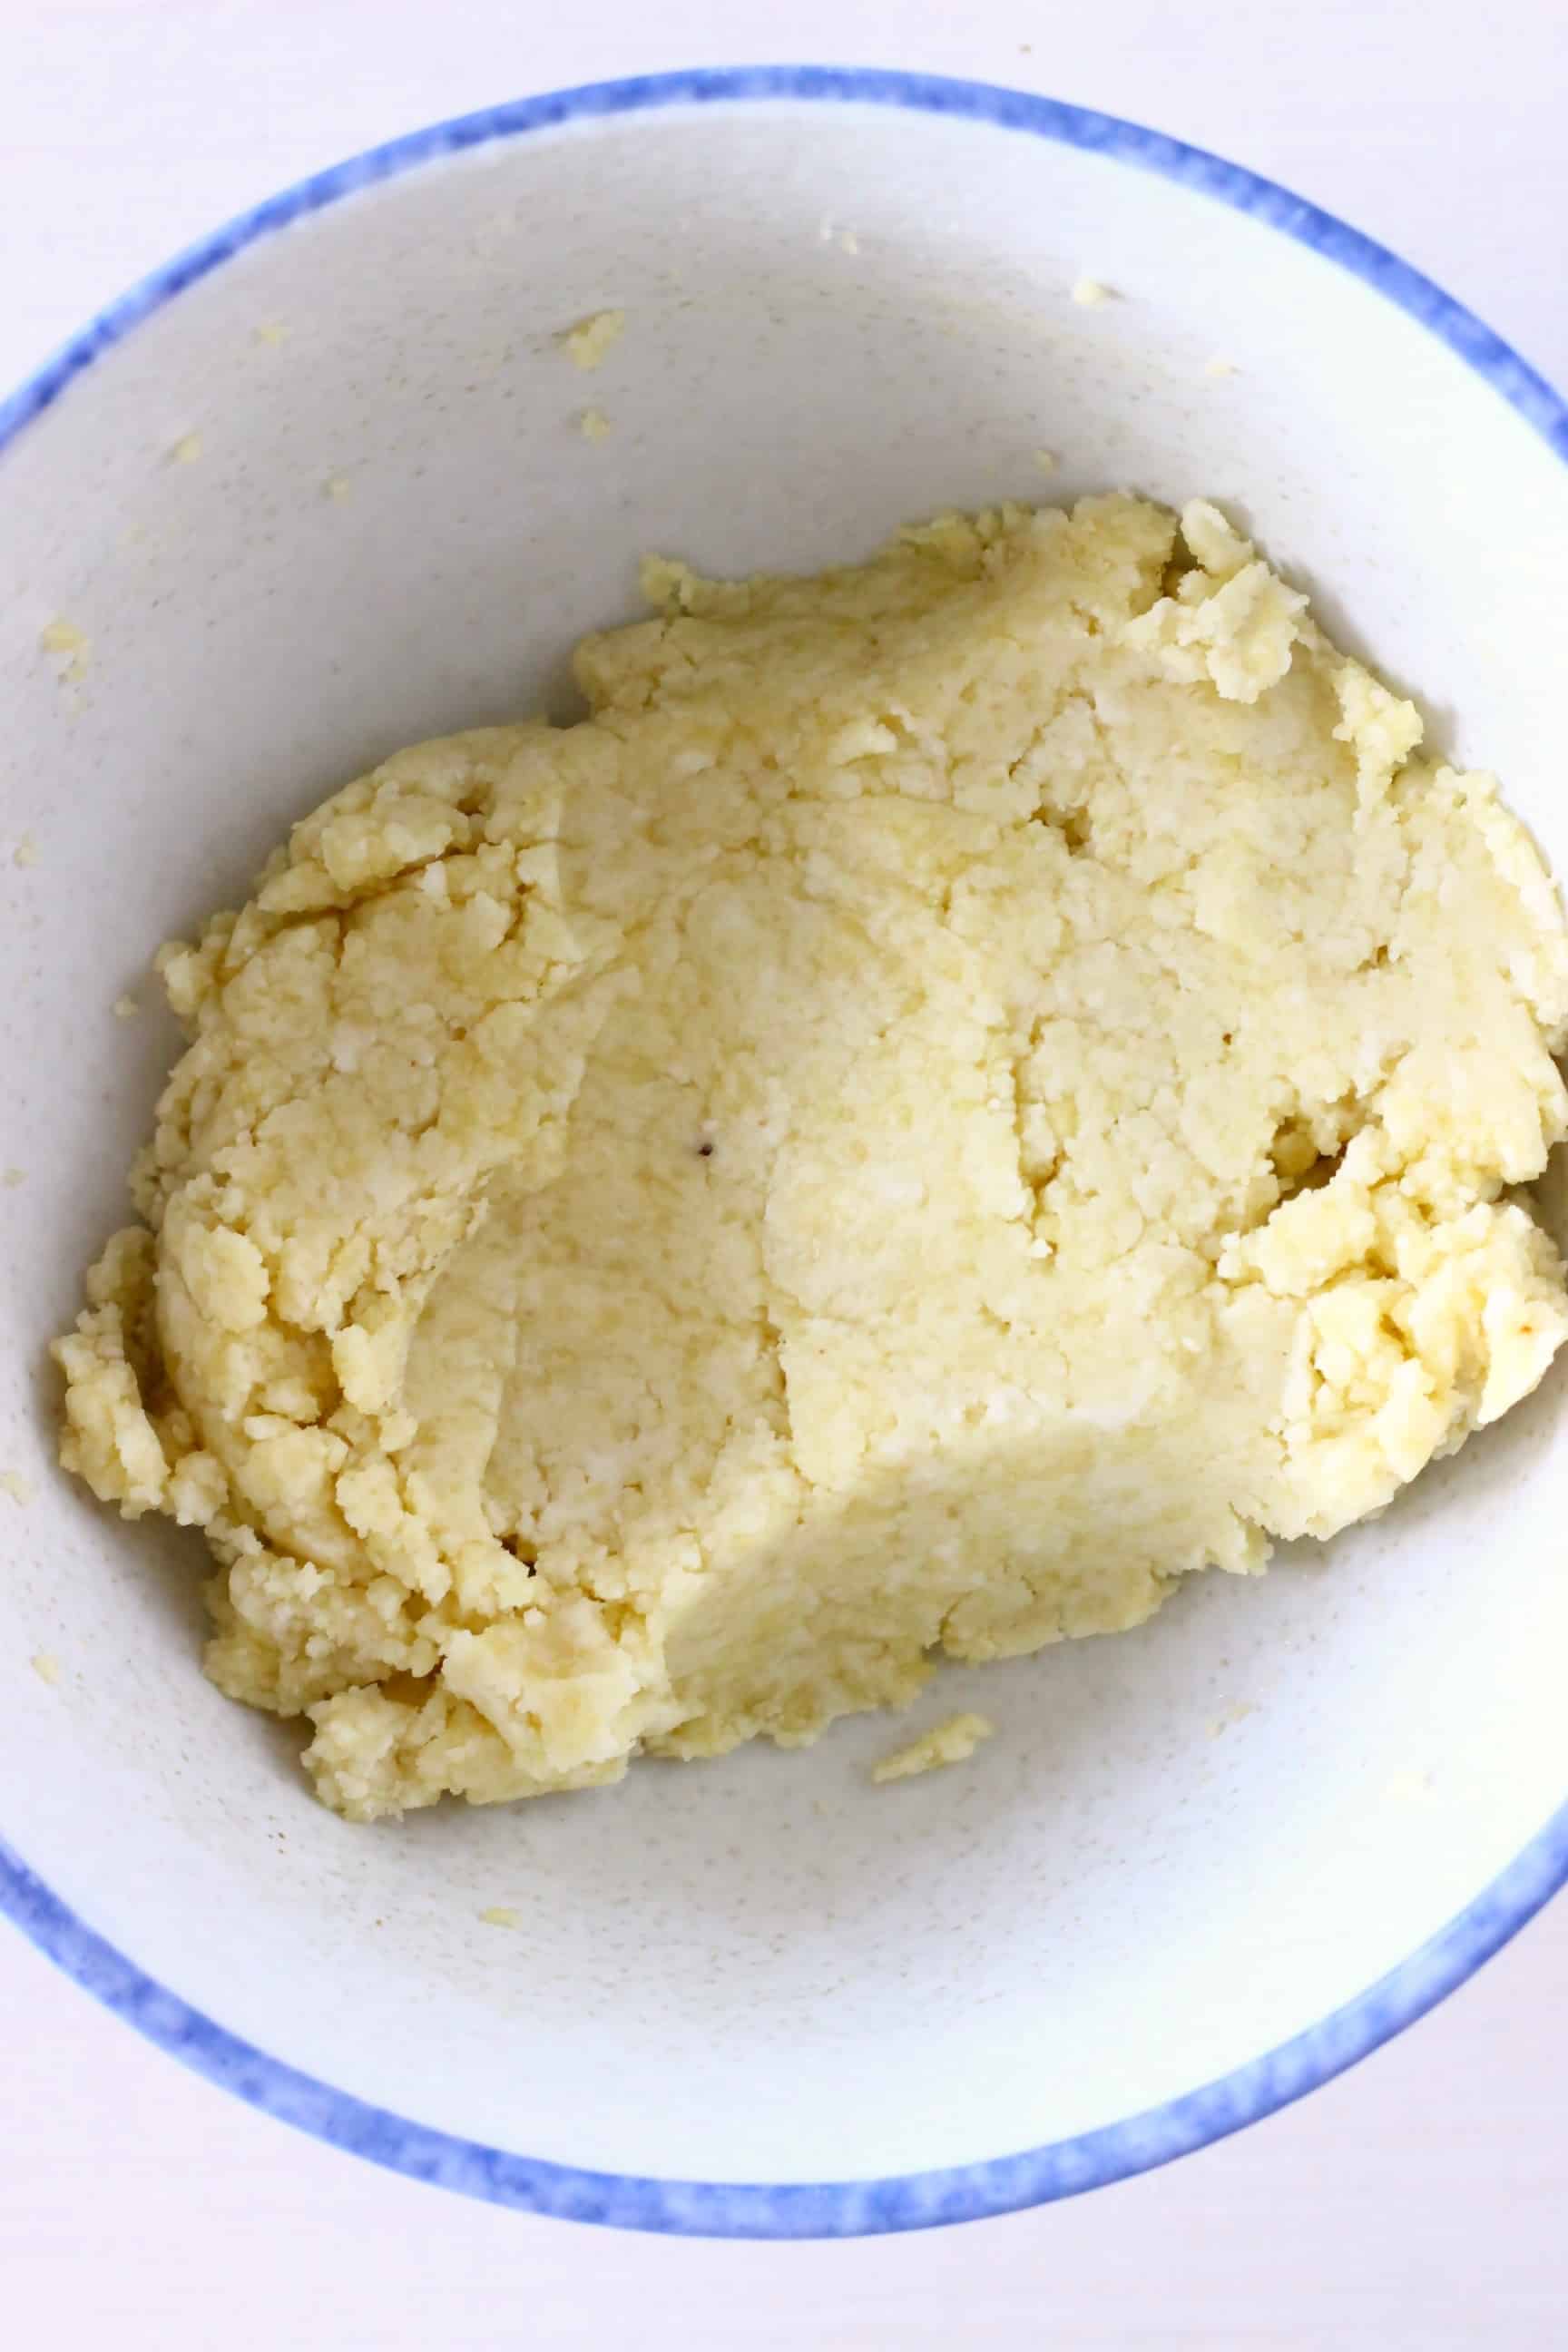 Raw gluten-free vegan pastry dough in a bowl